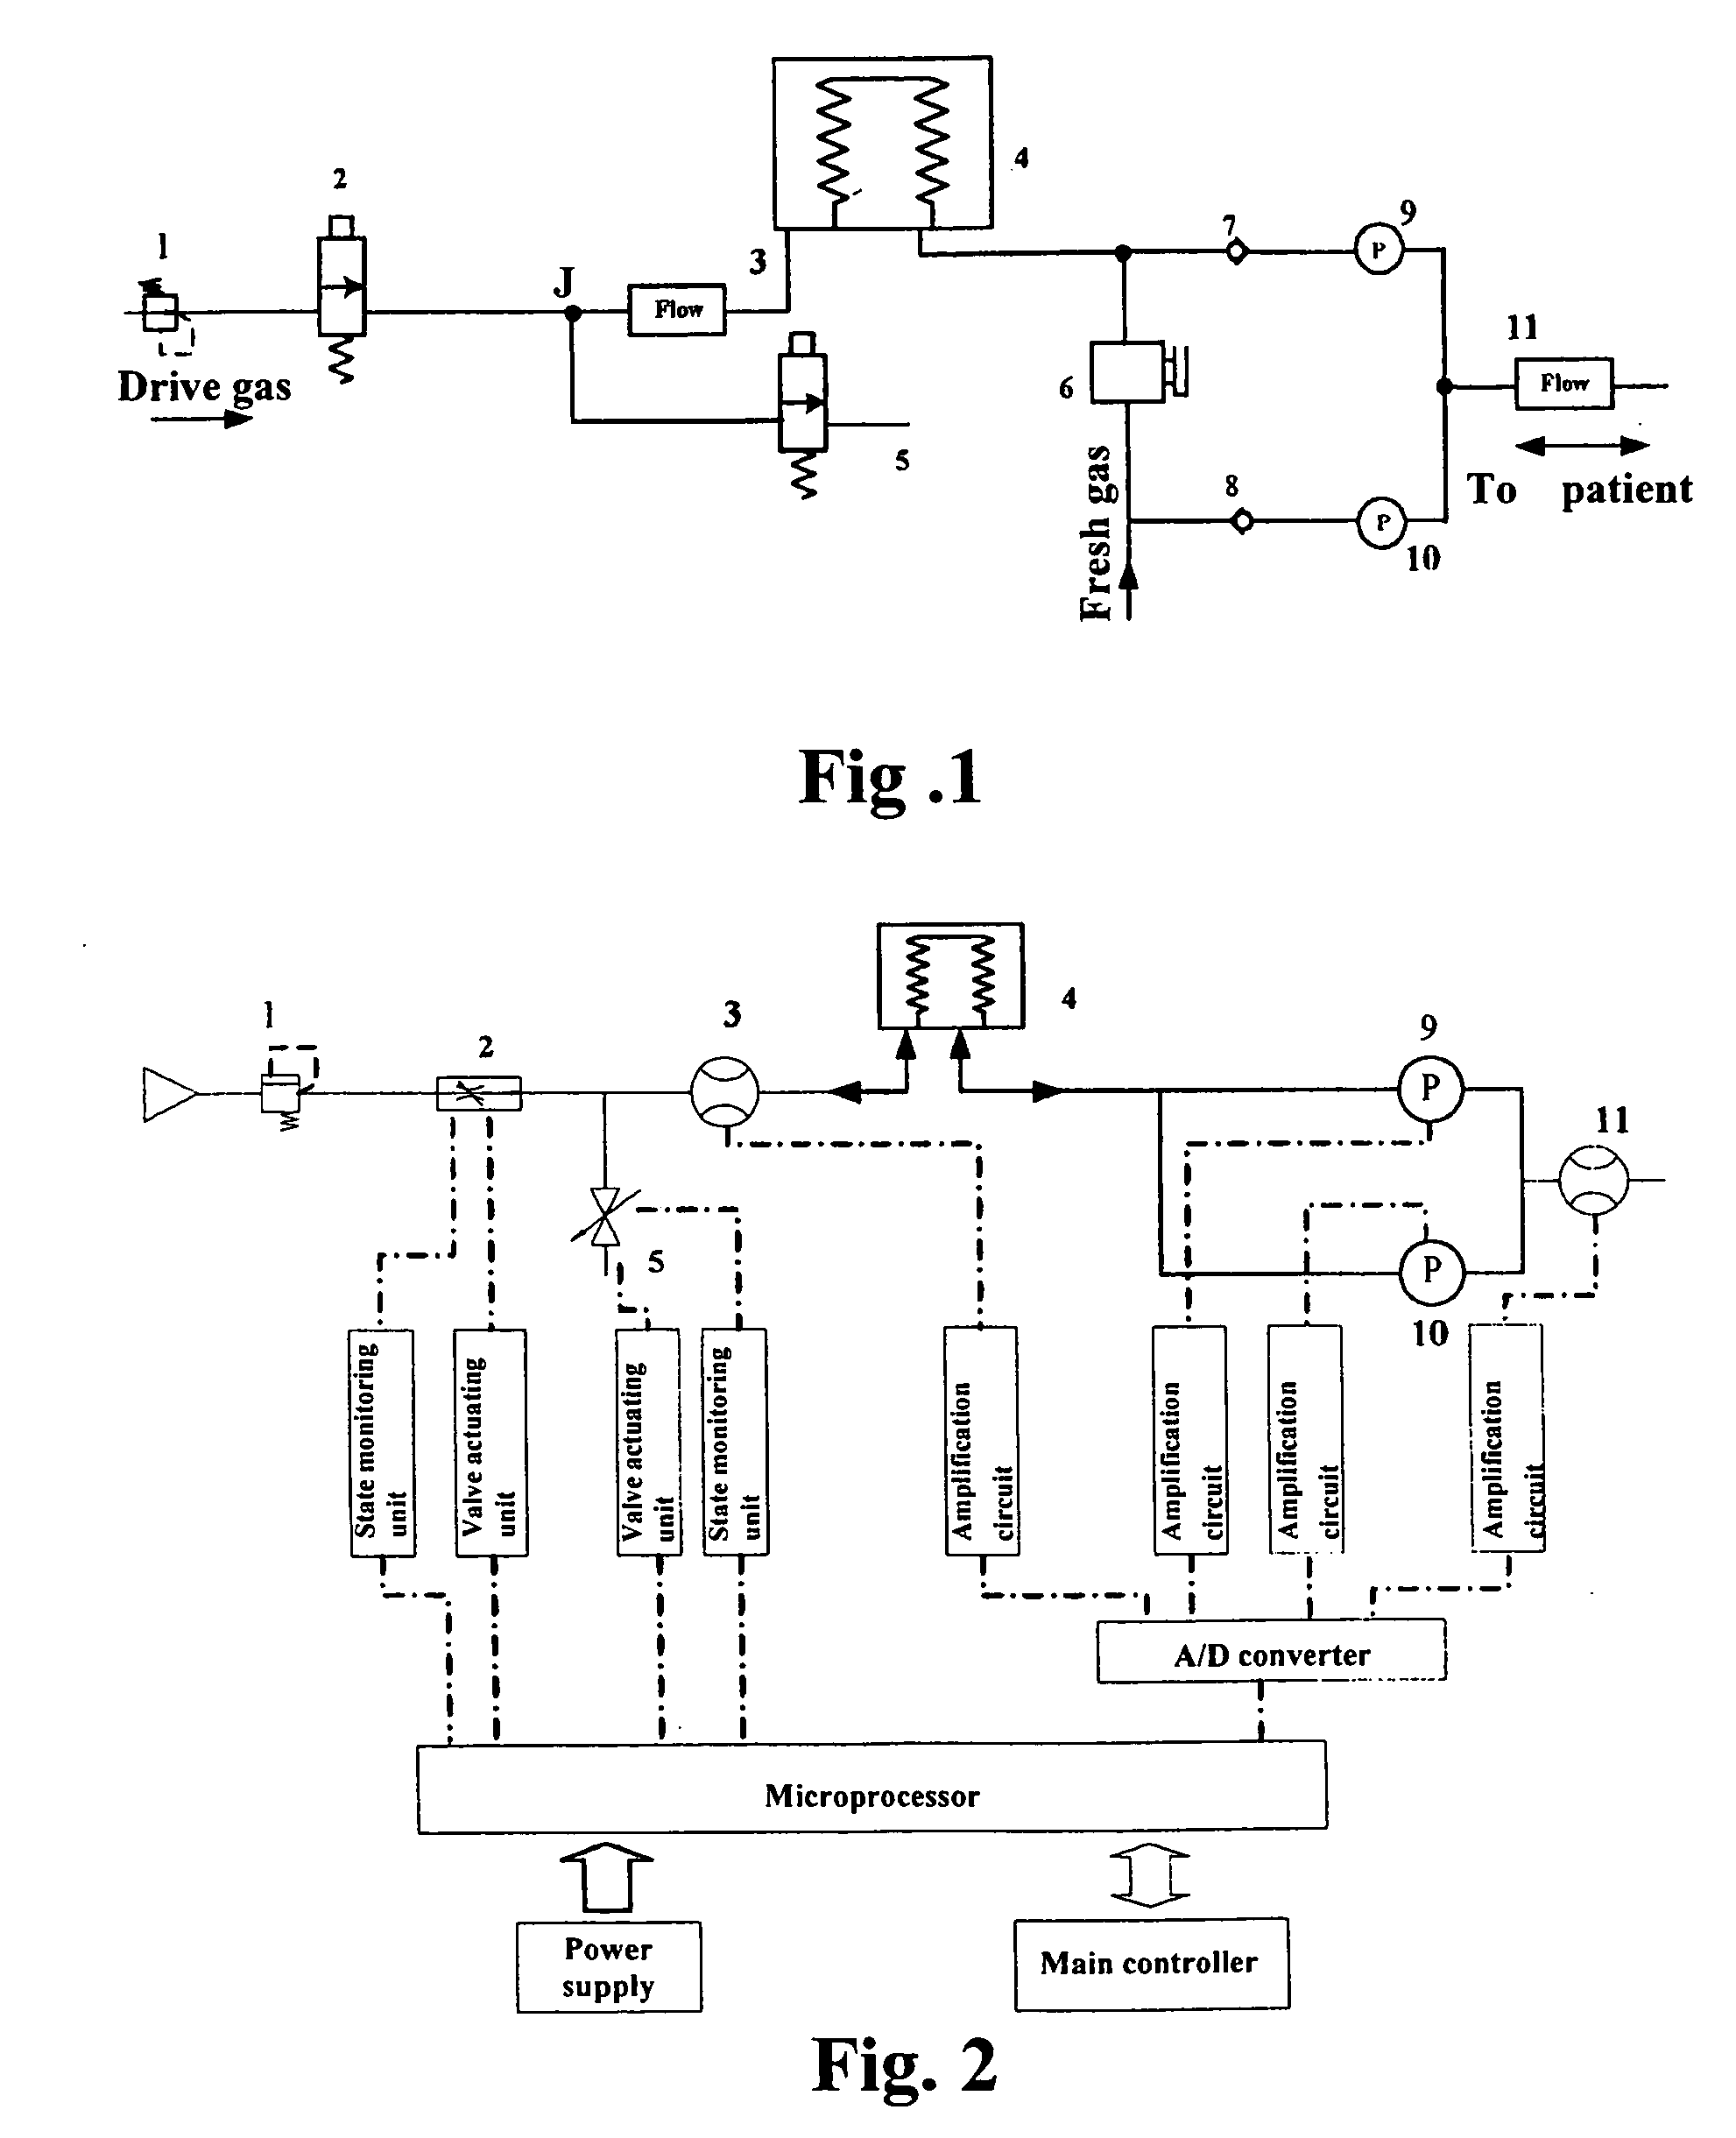 Method and an apparatus for monitoring and controlling flows